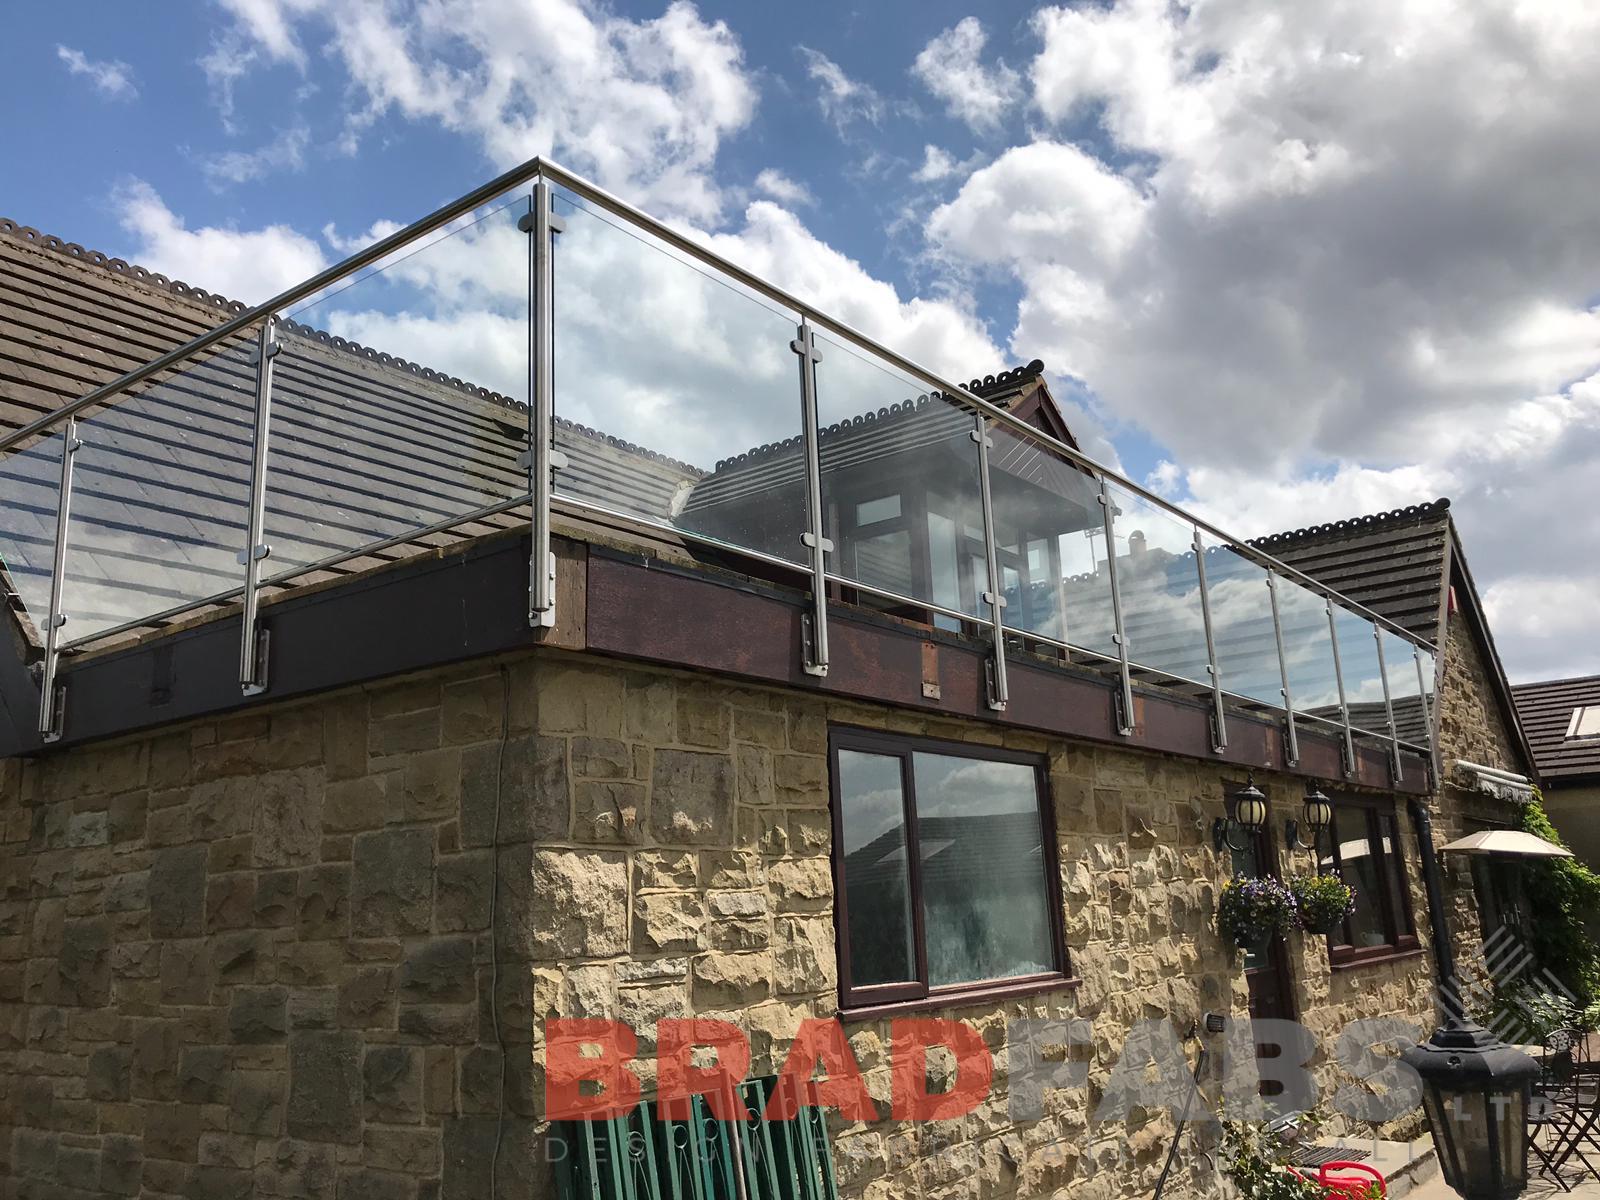 Bespoke balustrade added to customers existing roof, safety glass with stainless steel top rail by bradfabs 